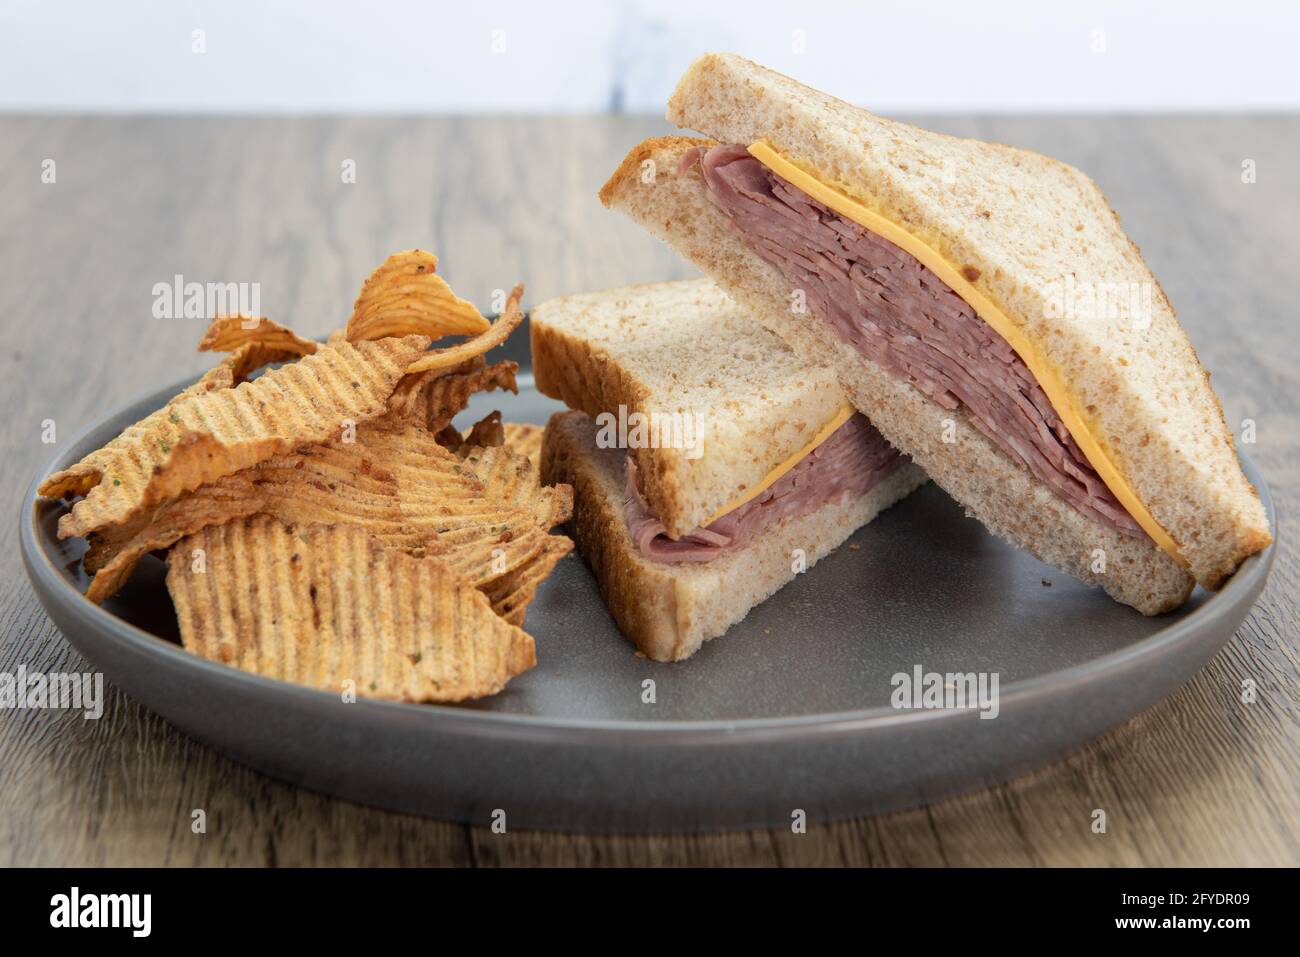 Appetizing triangle cut ham and cheese sandwich and chips is a perfect meal for a quick lunch break at work. Stock Photo